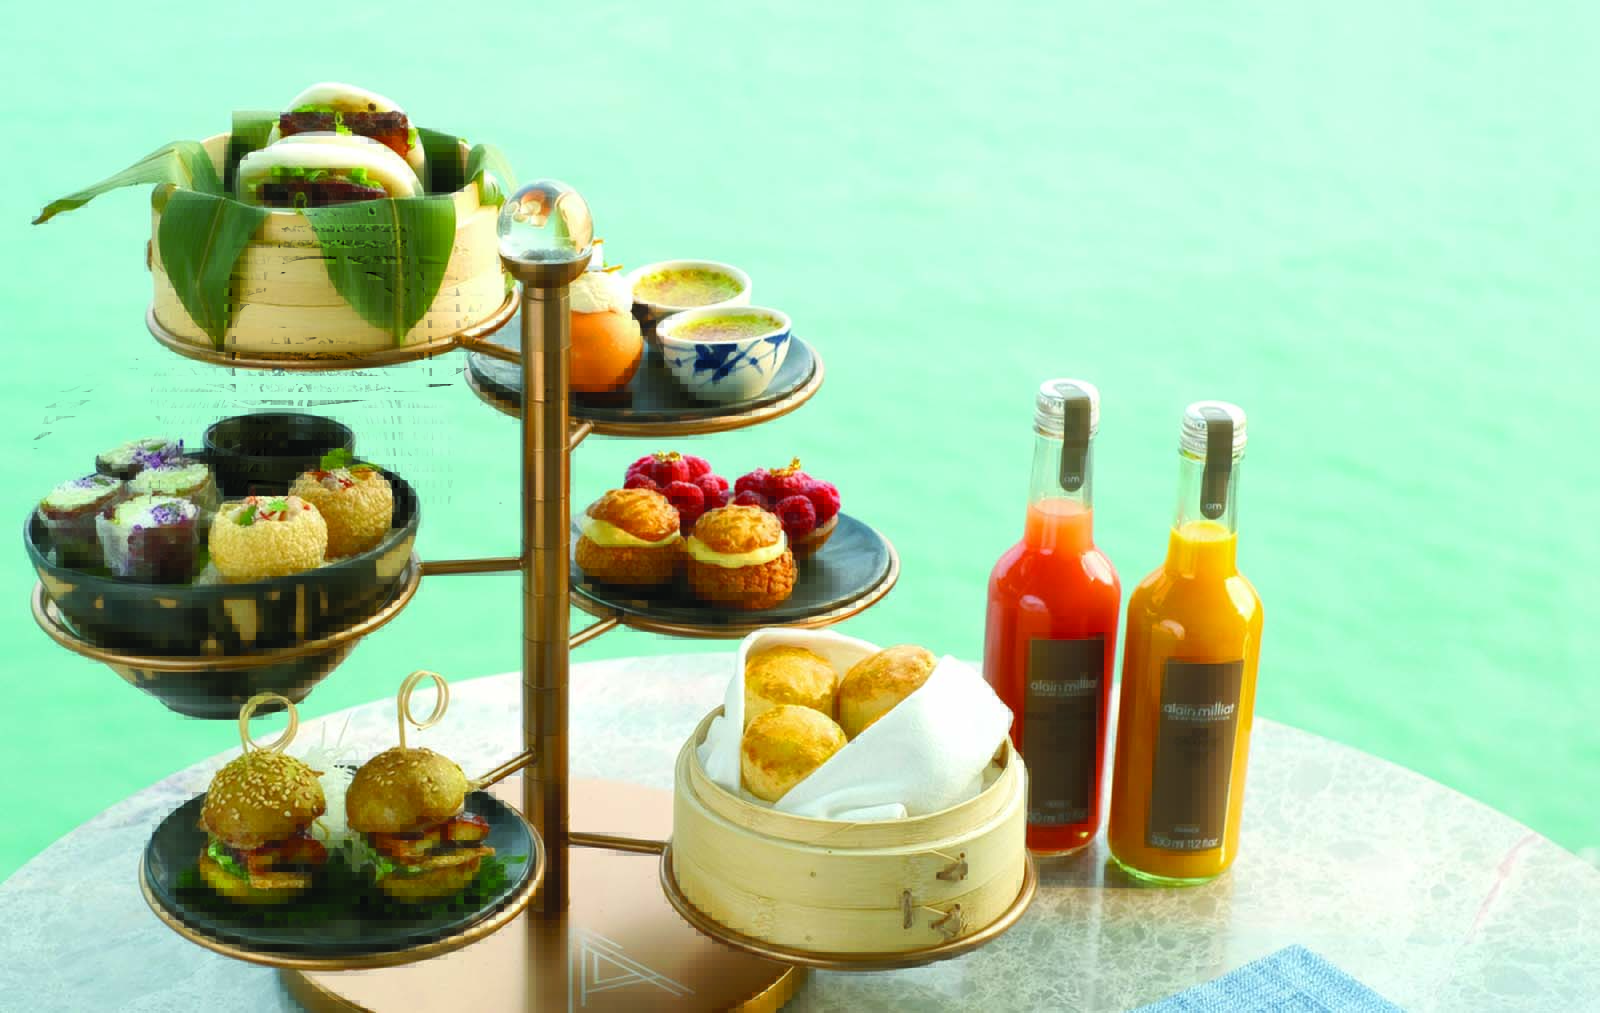 Afternoon Tea by the Harbour at The Commune comes with tasty treats